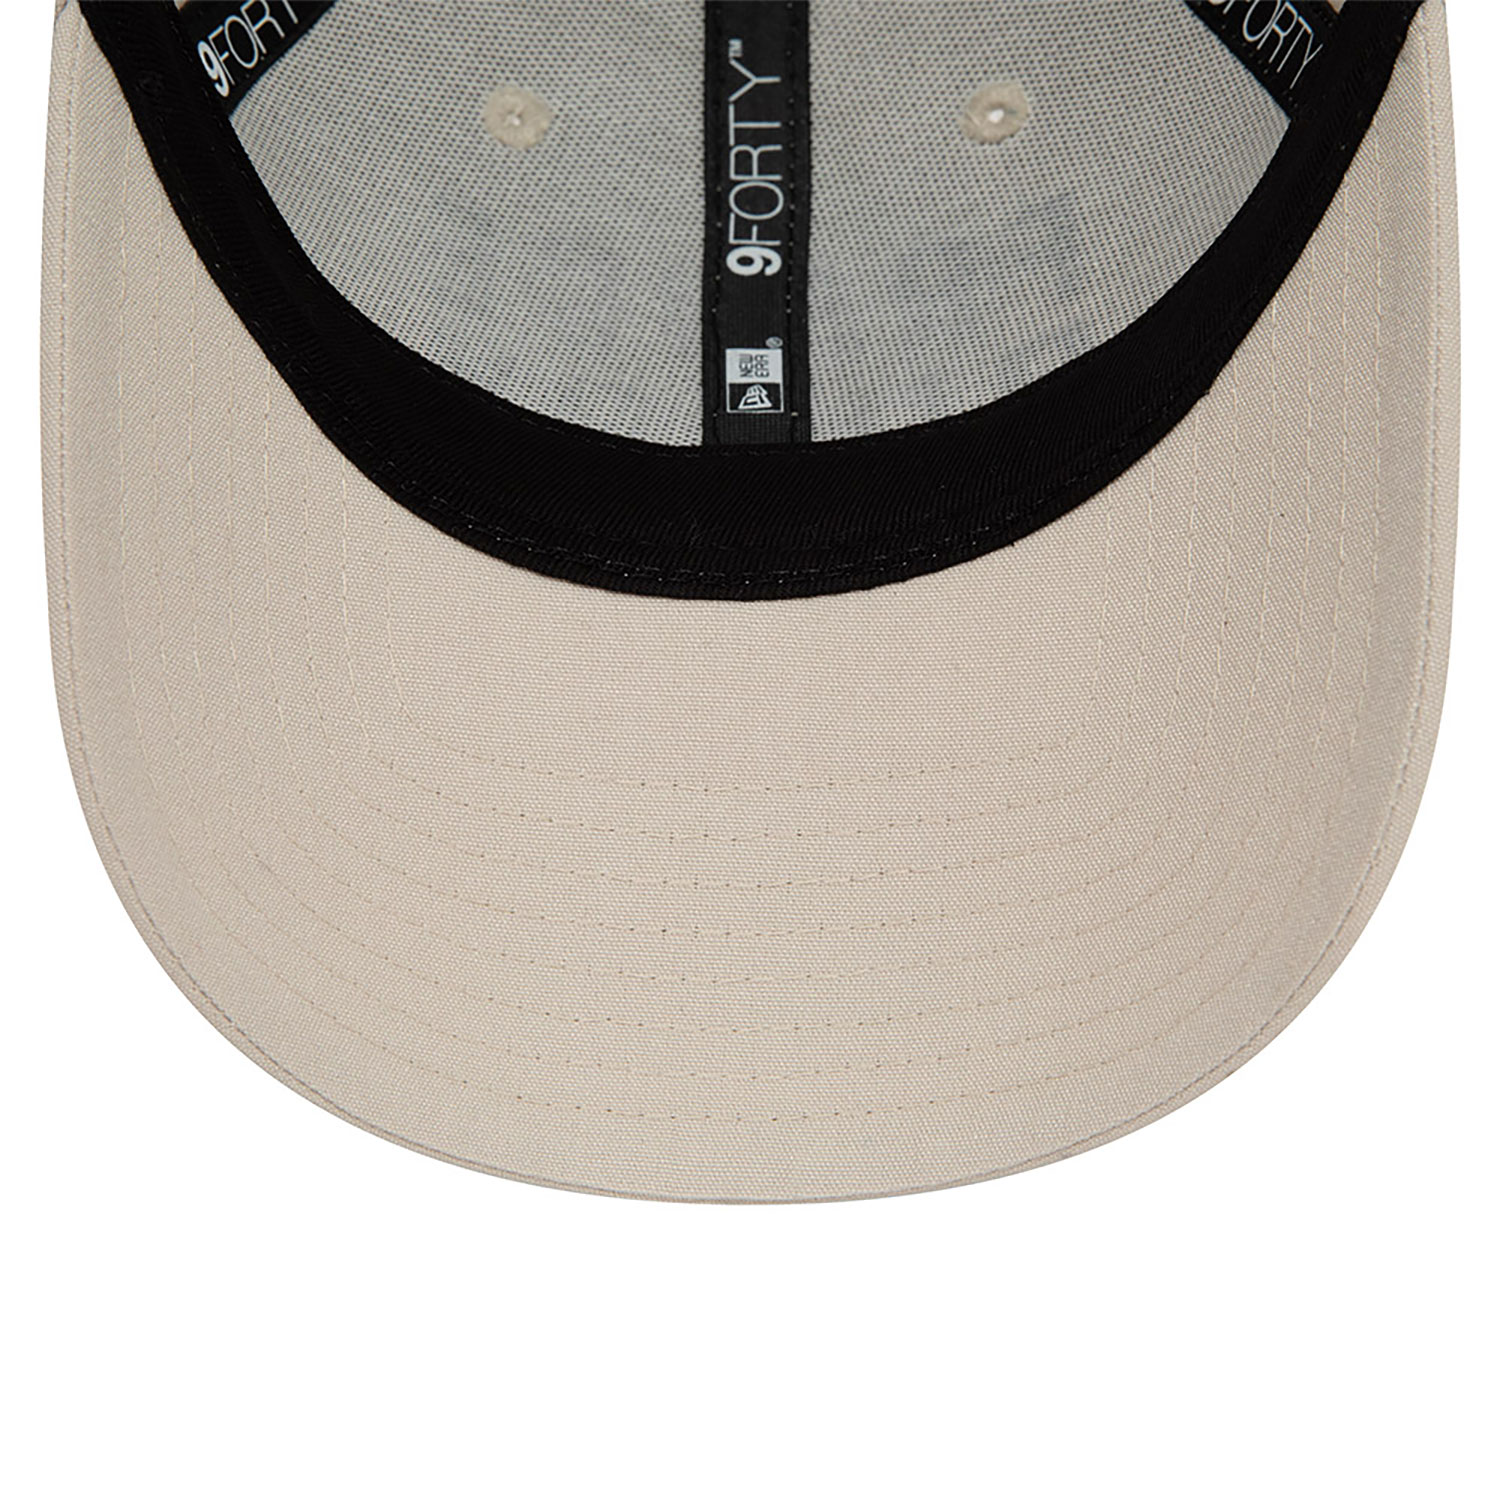 French Federation Of Rugby Repreve Stone 9FORTY Adjustable Cap